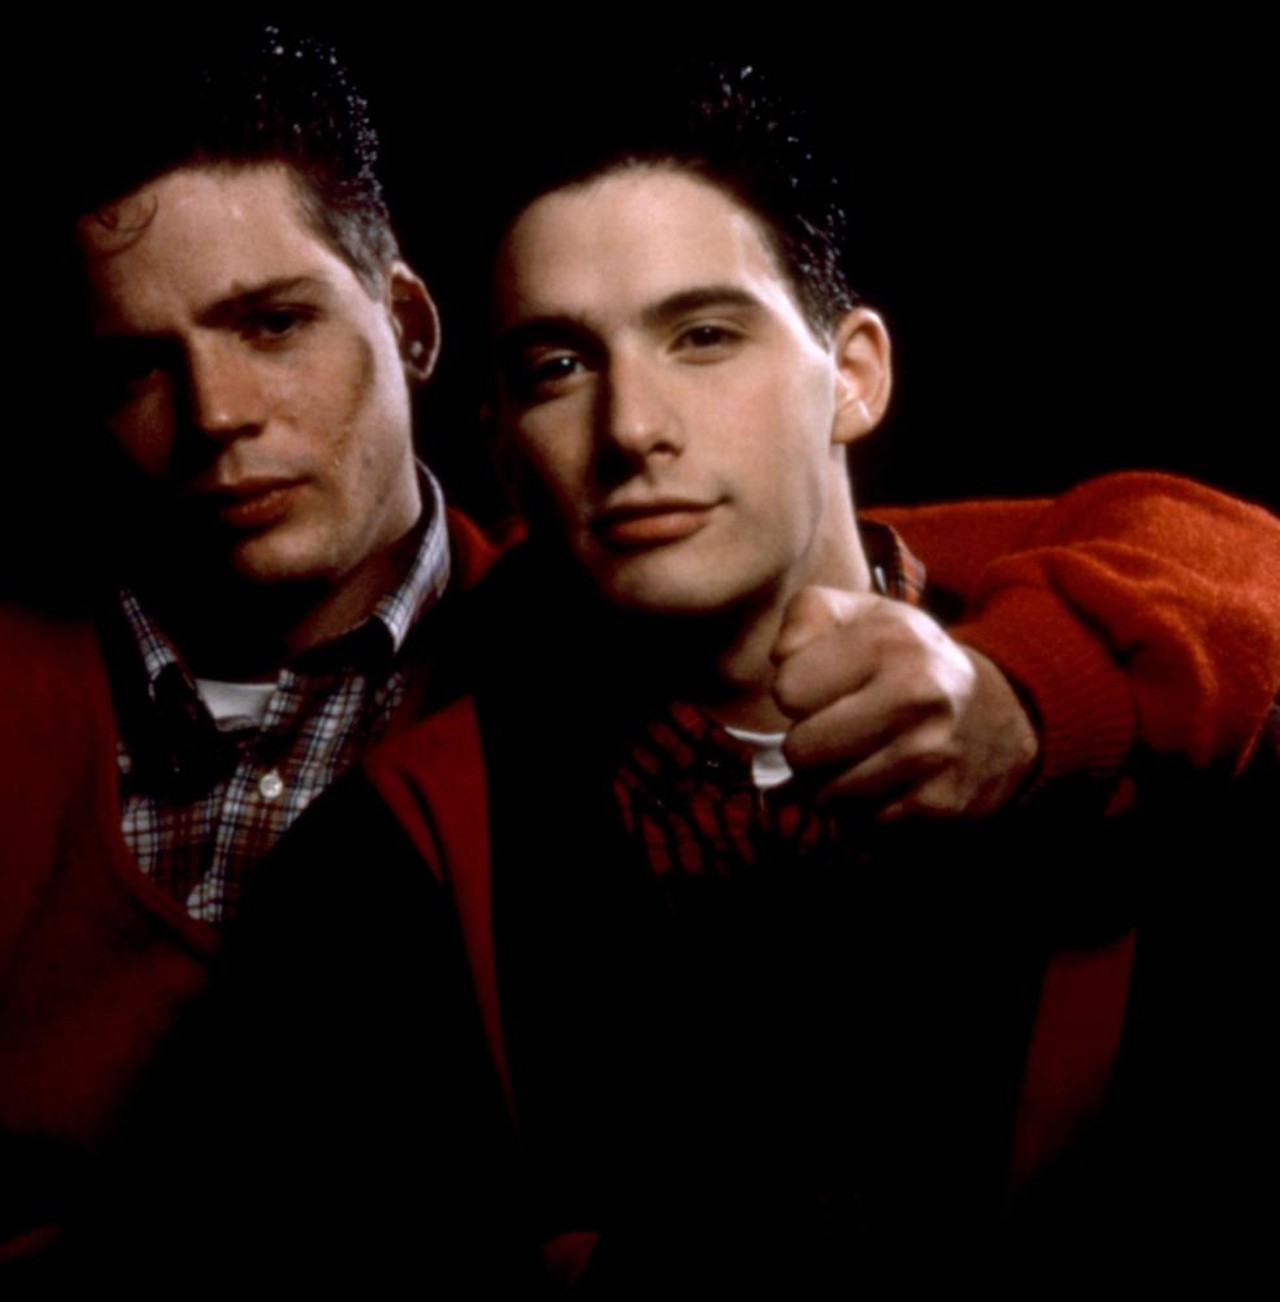 Adam Horovitz (King Ad-Rock) – Lost Angels 
The former member of the Beastie Boys starred as Tim “Chino” Doolan, a troubled teen from Los Angeles who is sent to a psychiatric hospital after a run-in with the police. 
Photo via Orion Pictures